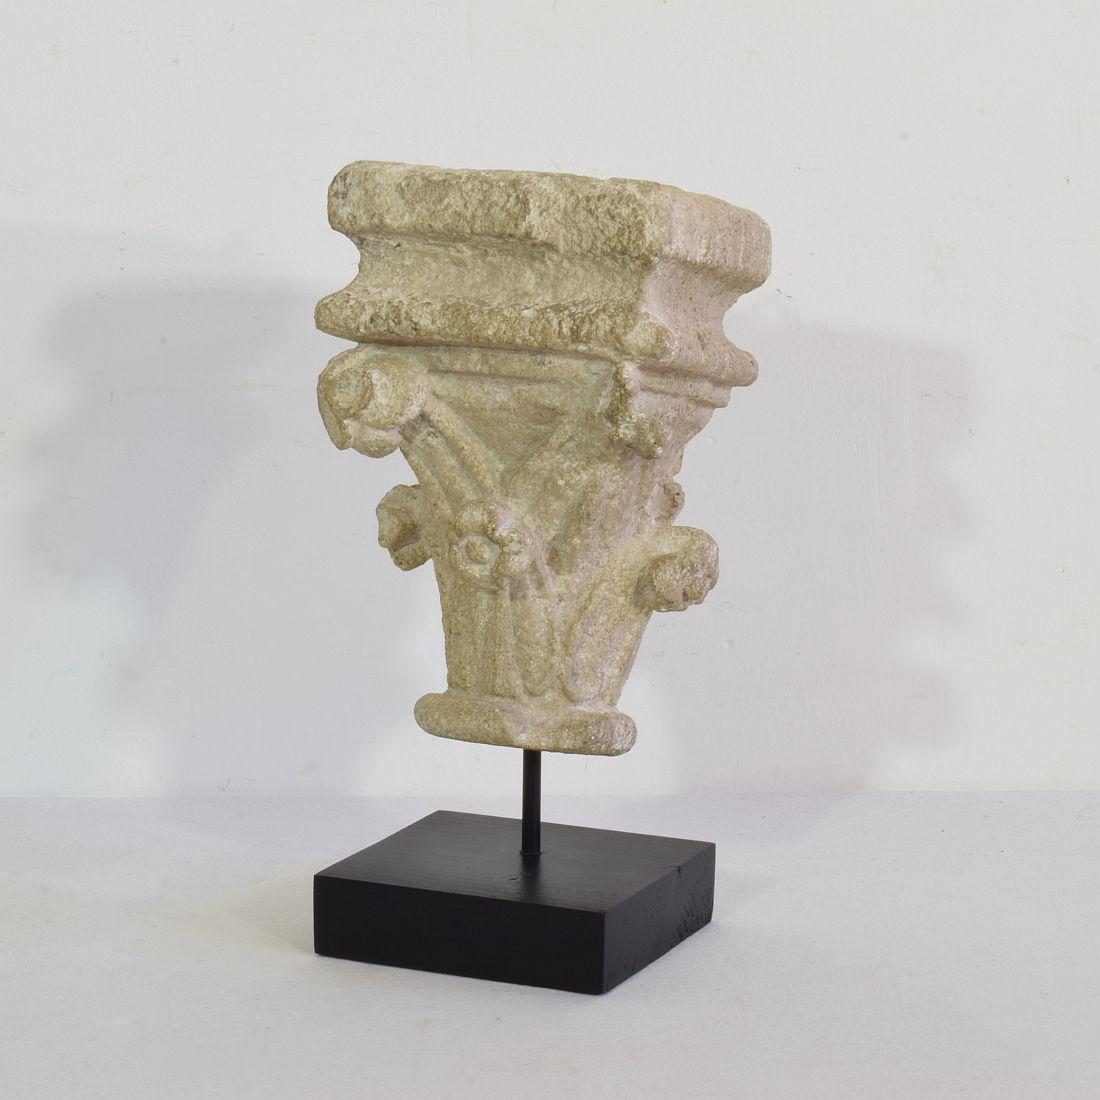 Rare and beautiful small medieval treasure.
Hand carved Romanesque stone capital,
France, circa 1250-1400.
Weathered, small losses.
Now placed on a wooden pedestal. The item once also got a small a hook to hang it on the wall.